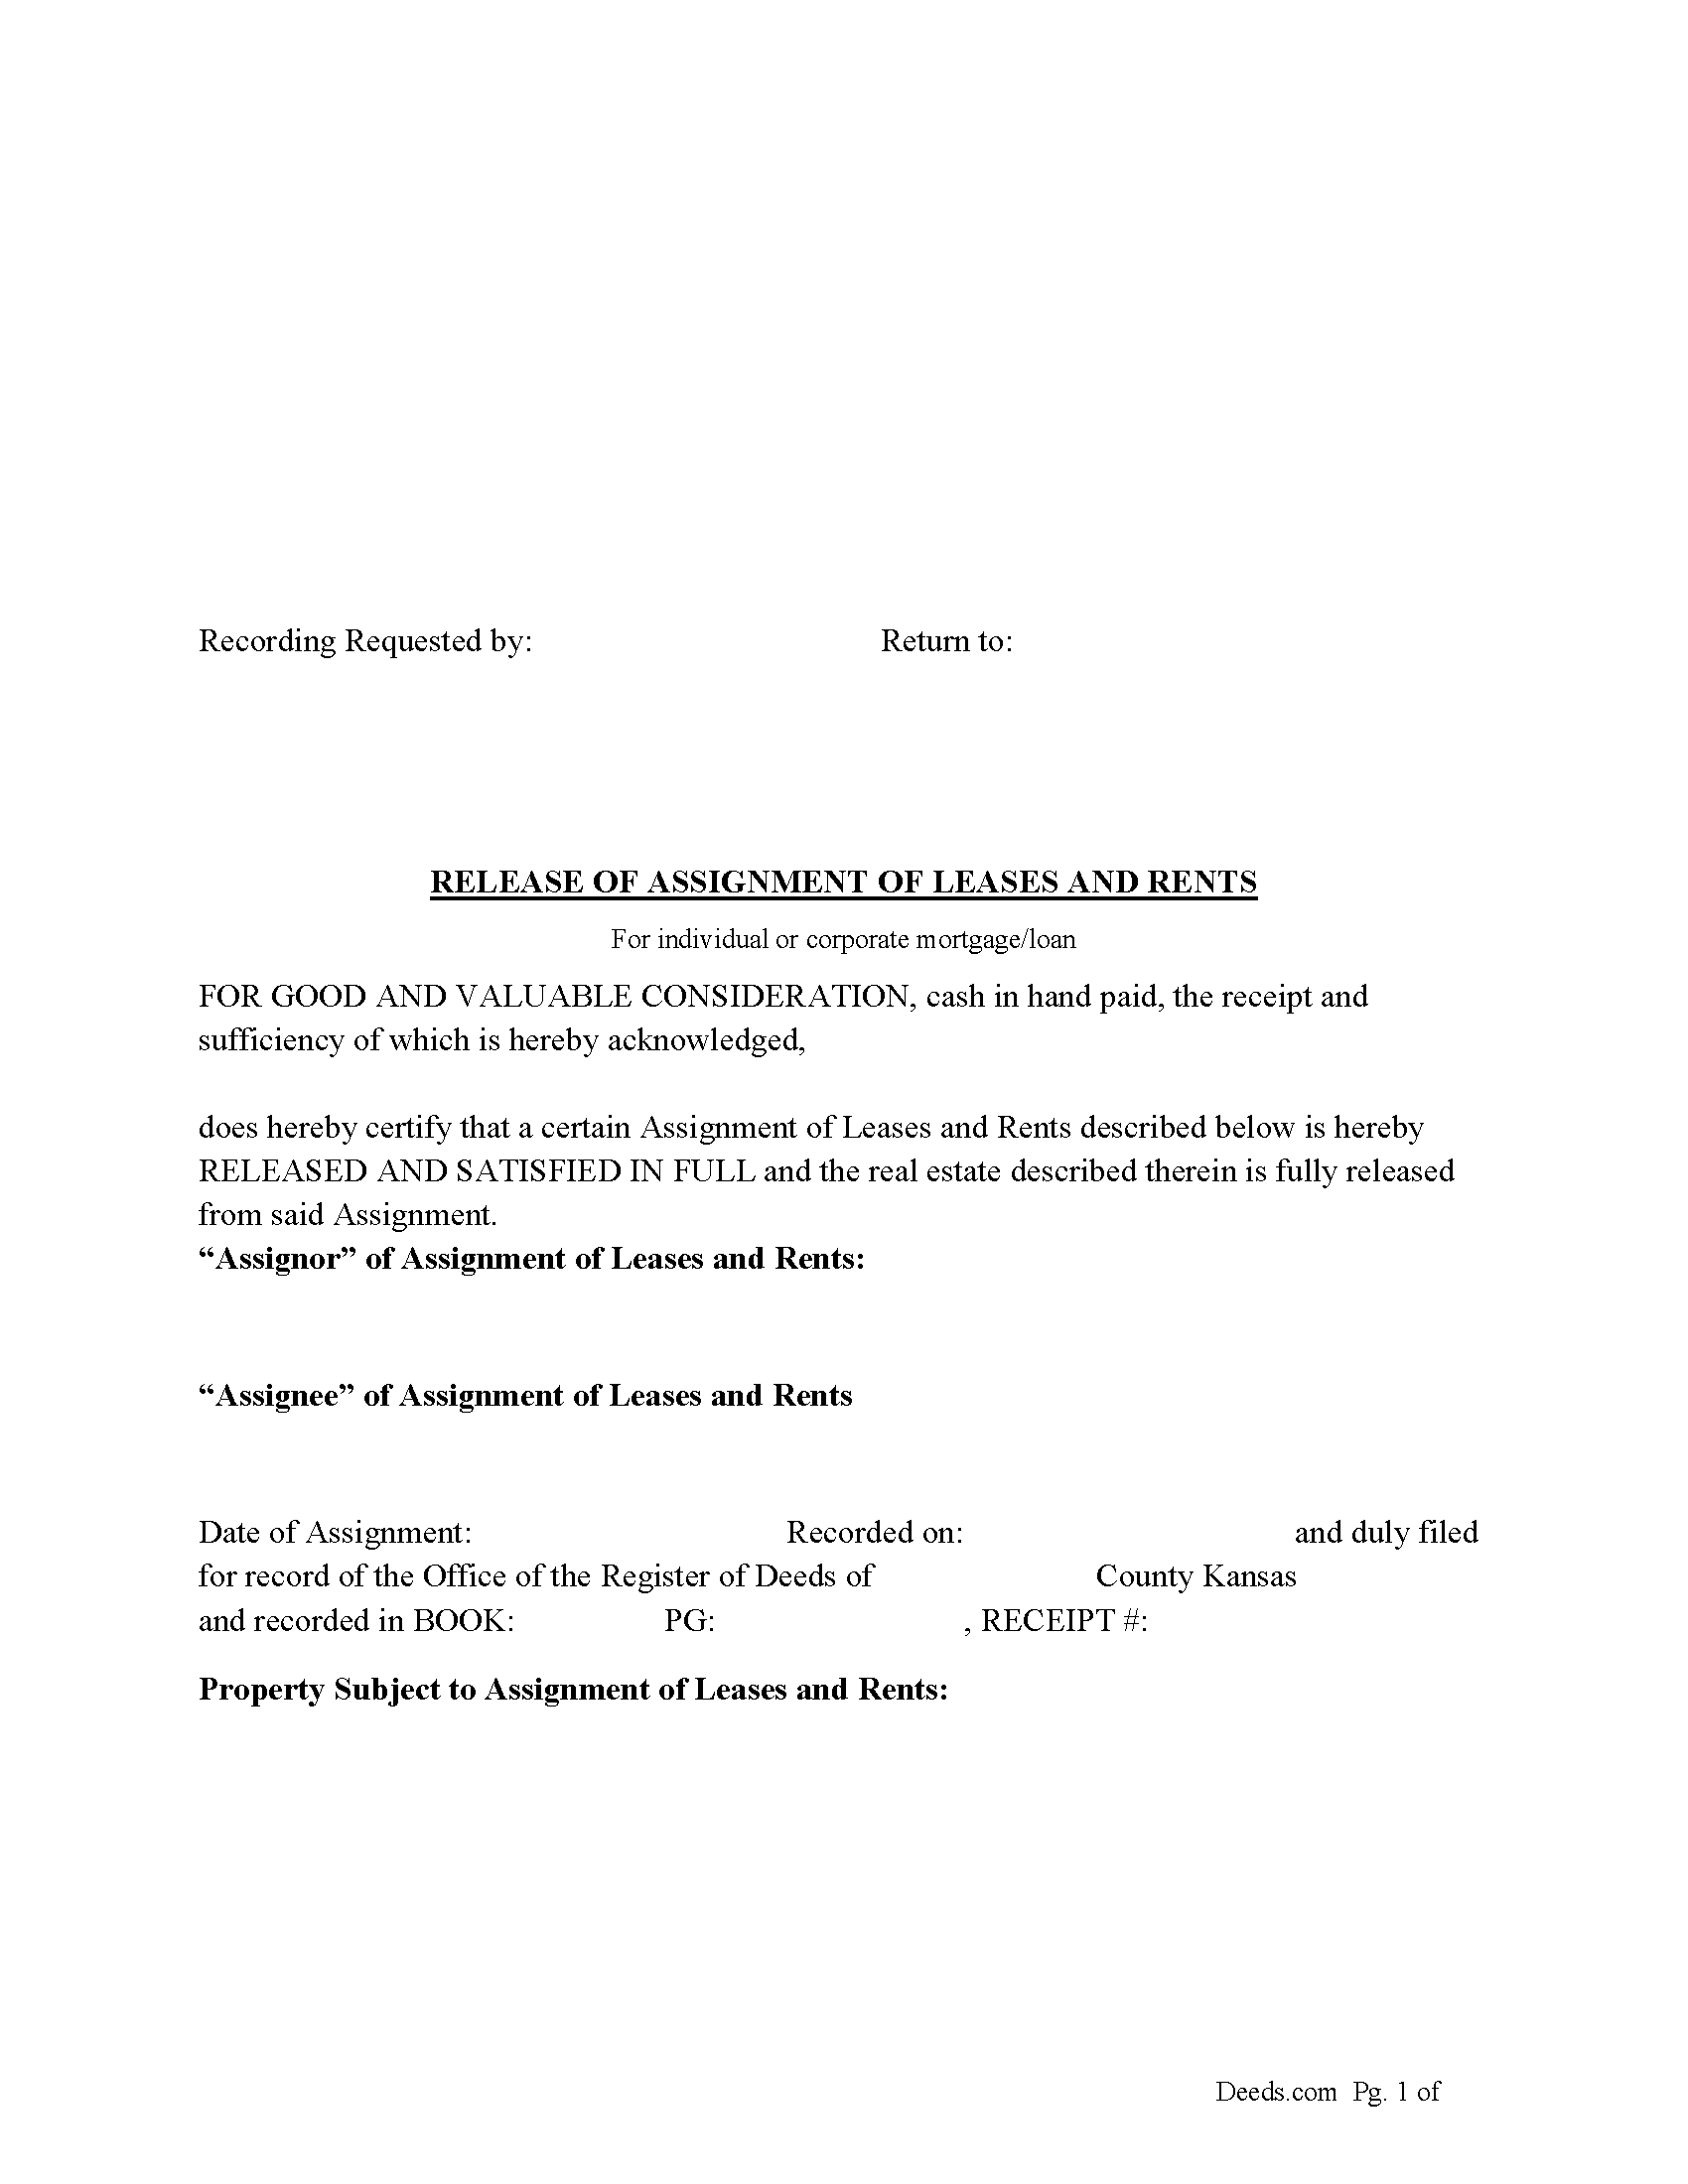 Release of Assignment of Leases and Rents